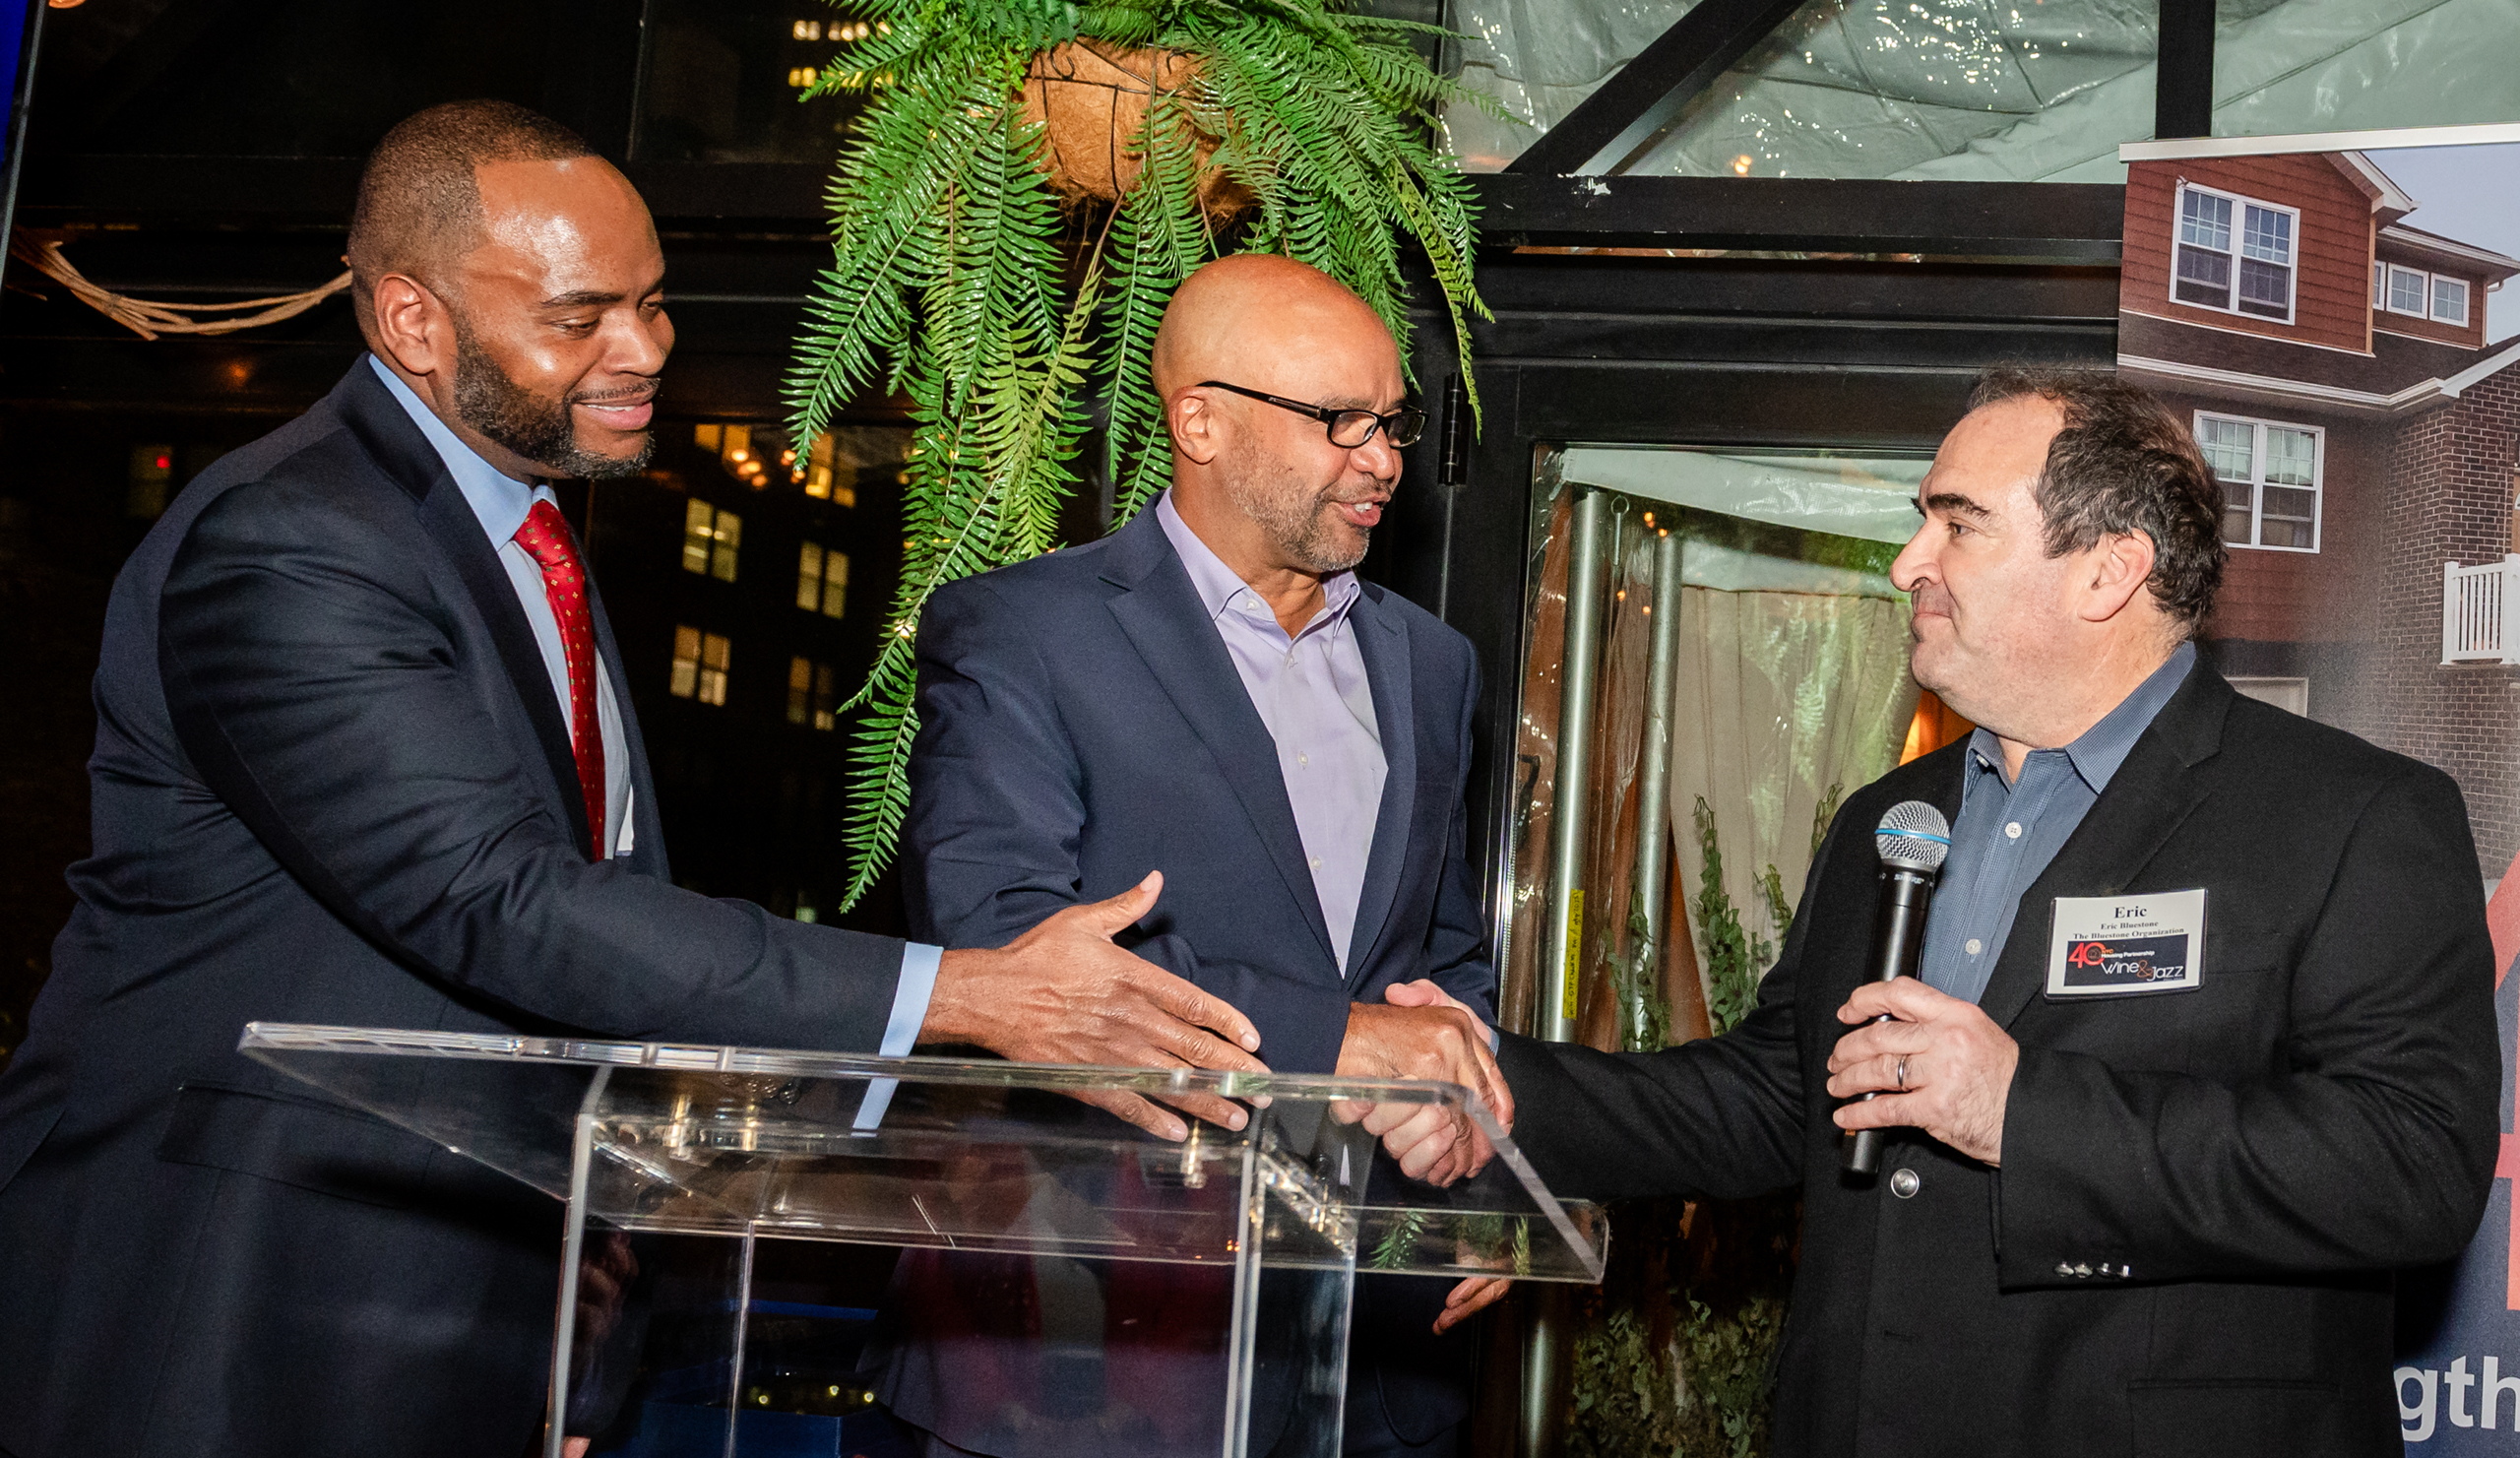 HP President & CEO Jamie Smarr (left), with NYC HPD Commissioner Adolfo Carrión, Jr. presents Eric Bluestone (right) of the Bluestone Organization with a Founding Partners award.